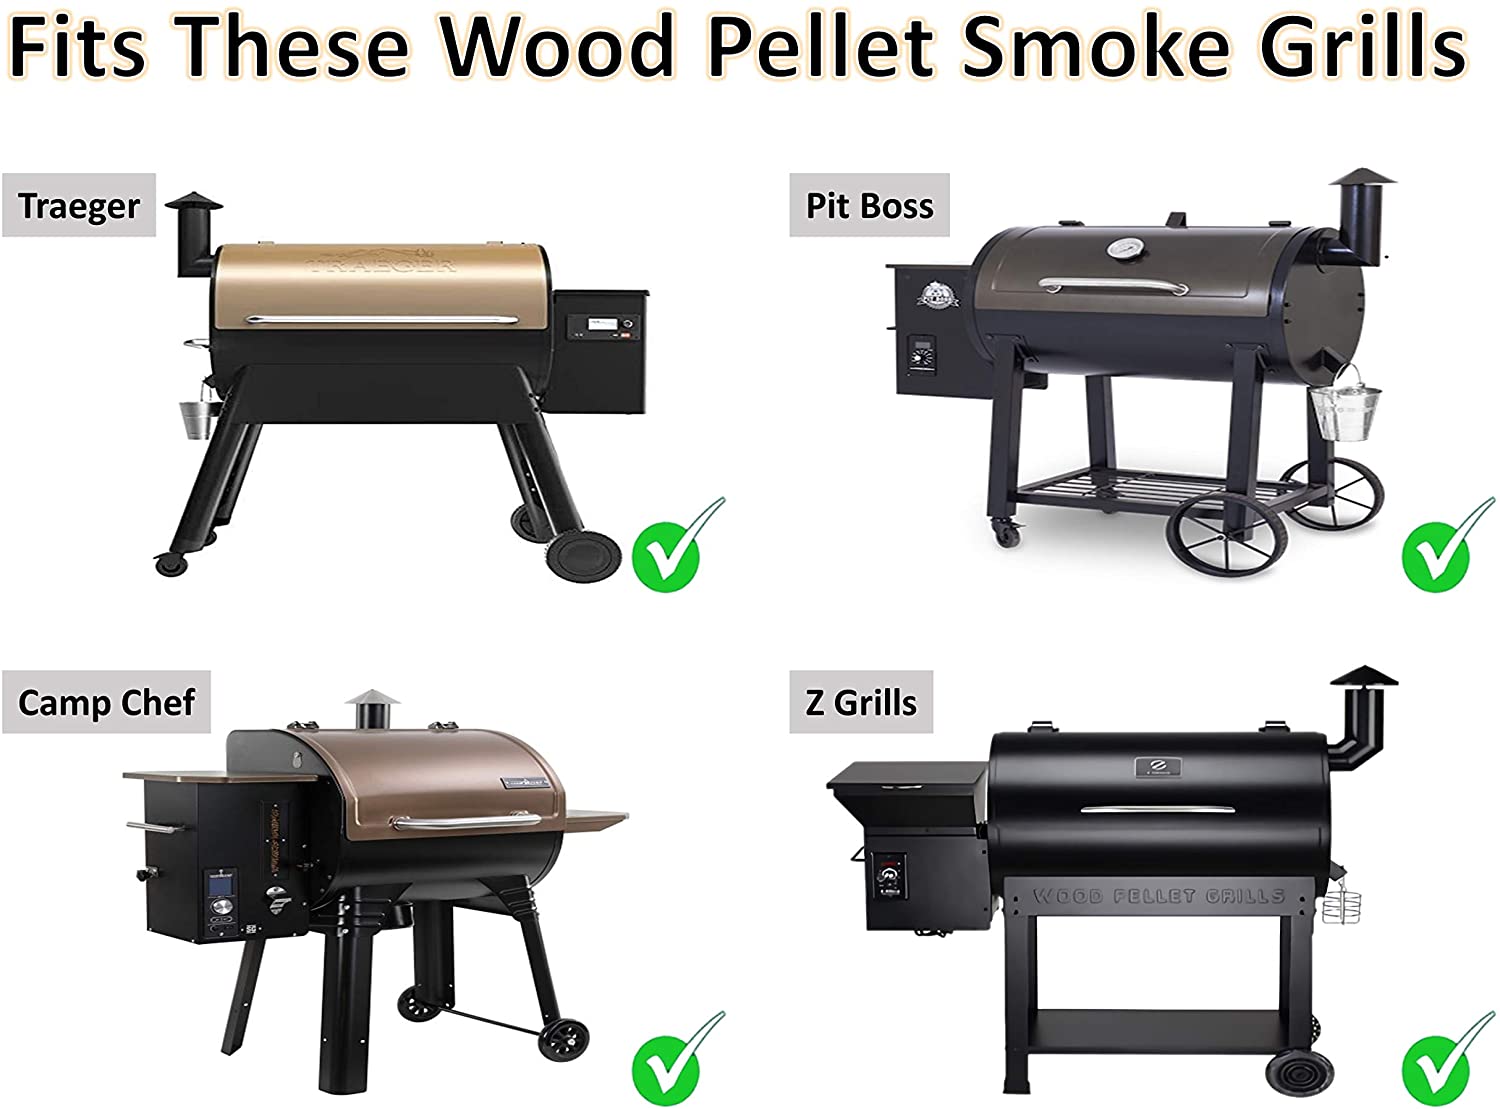 Grill Smoke Stack Chimney with Gasket Replacment for Pit Boss,Traeger,Camp Chef,Z Grills Wood Pellet Grill